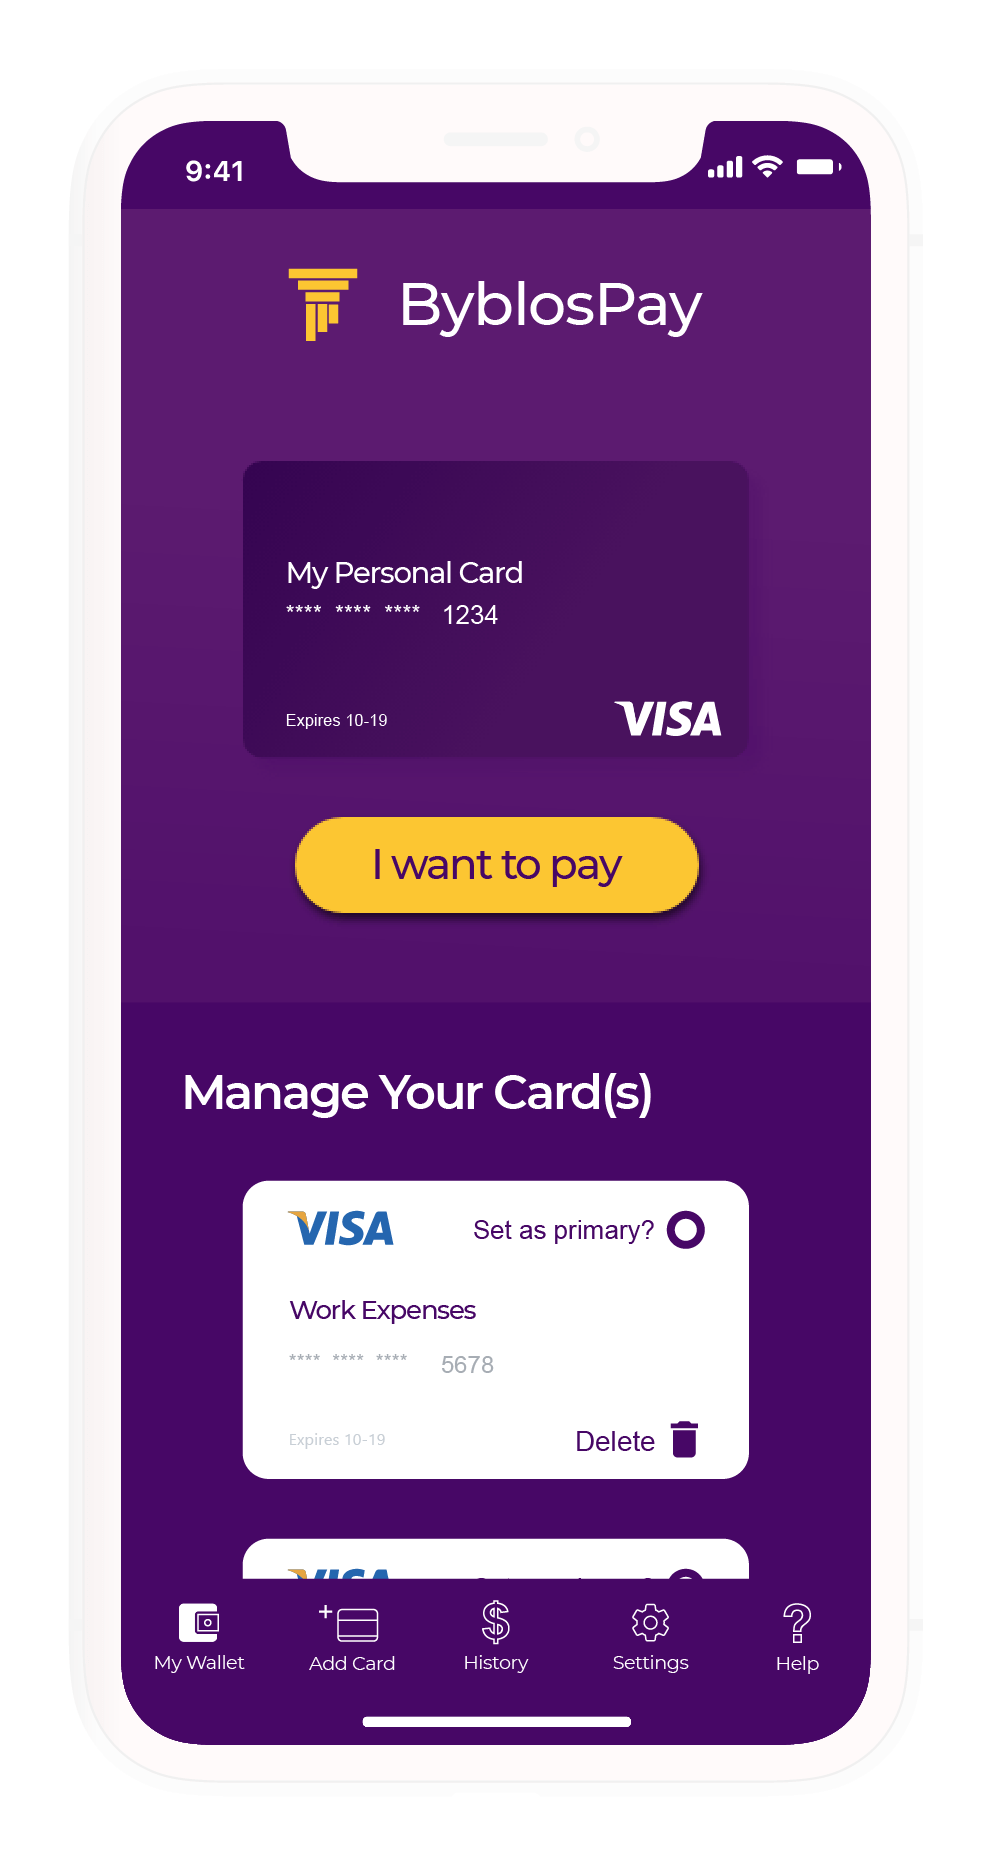 The UI design of the card wallet screen showing the Pay button, and the cards associated with the wallet